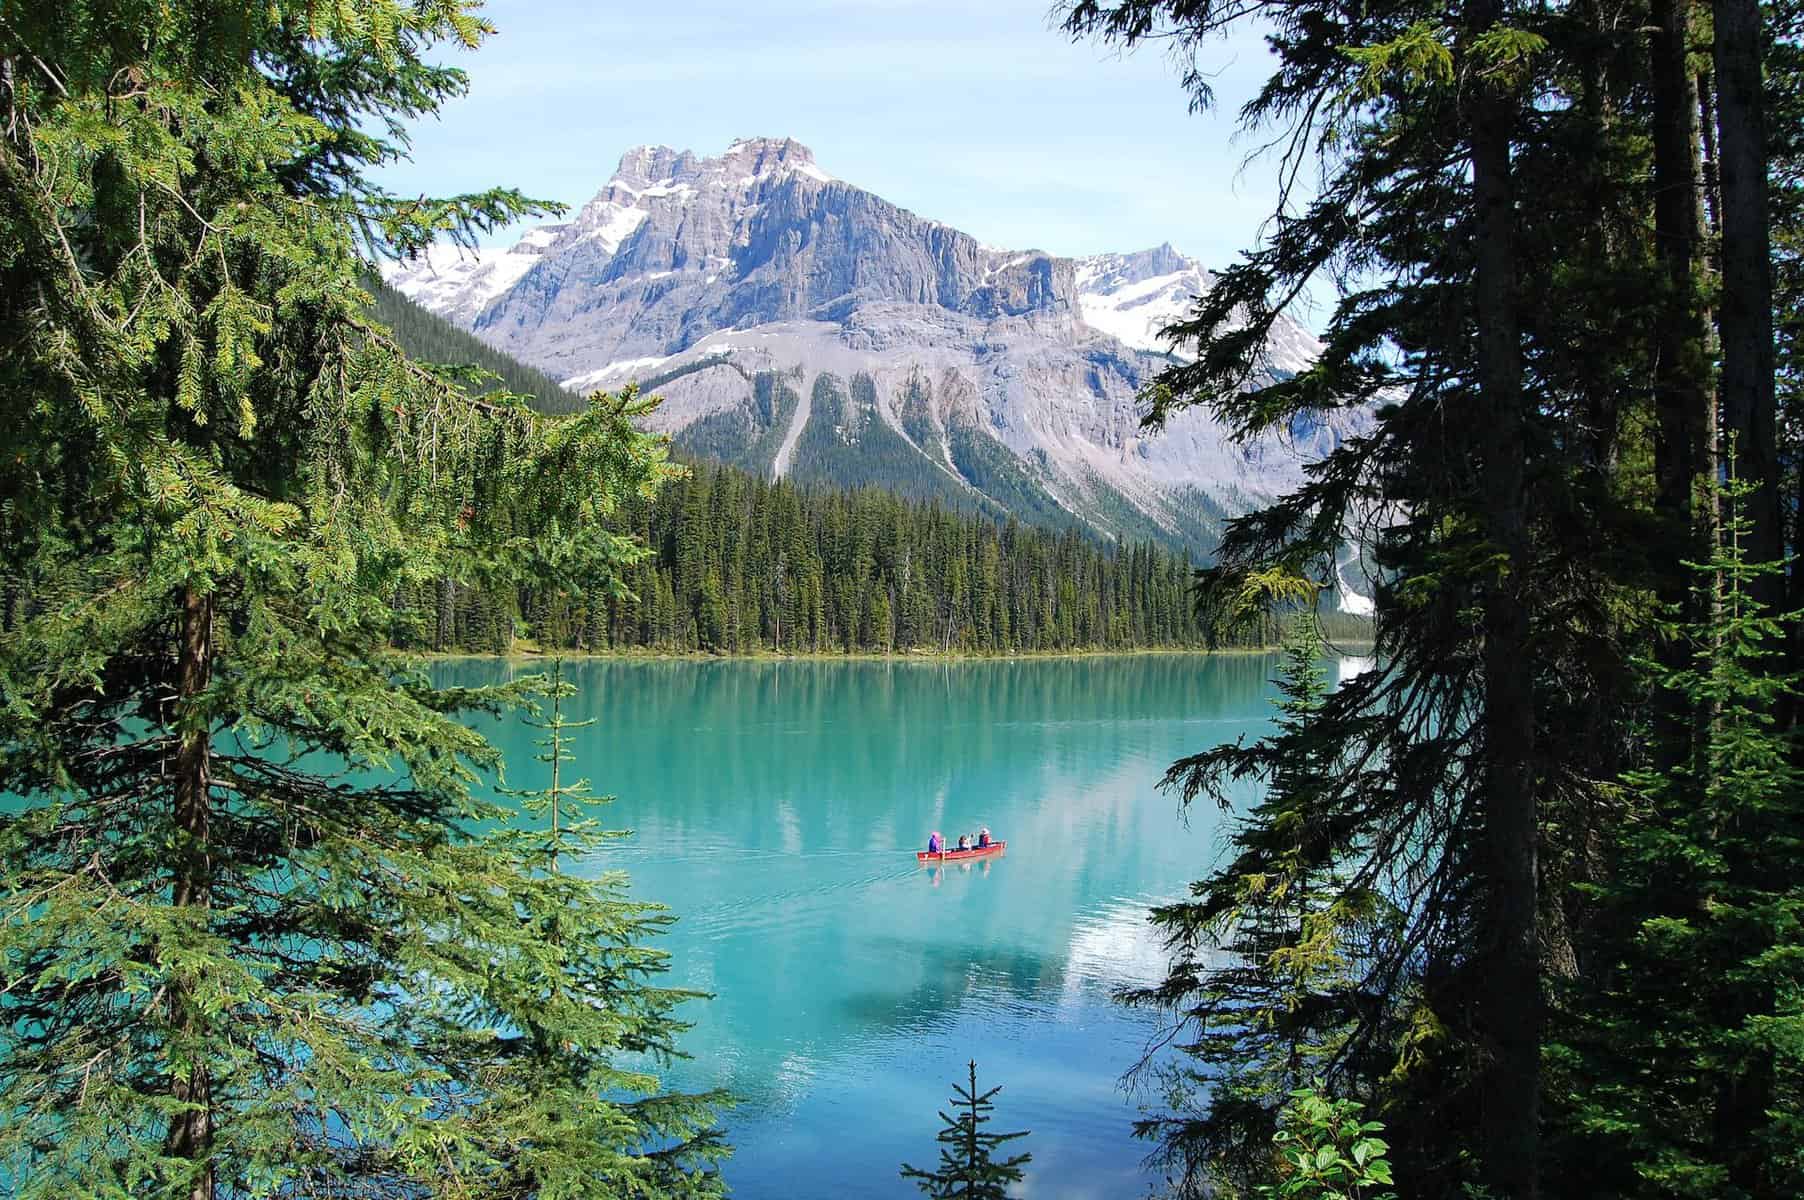 mountains, forests and water in Banff, Alberta, Canada